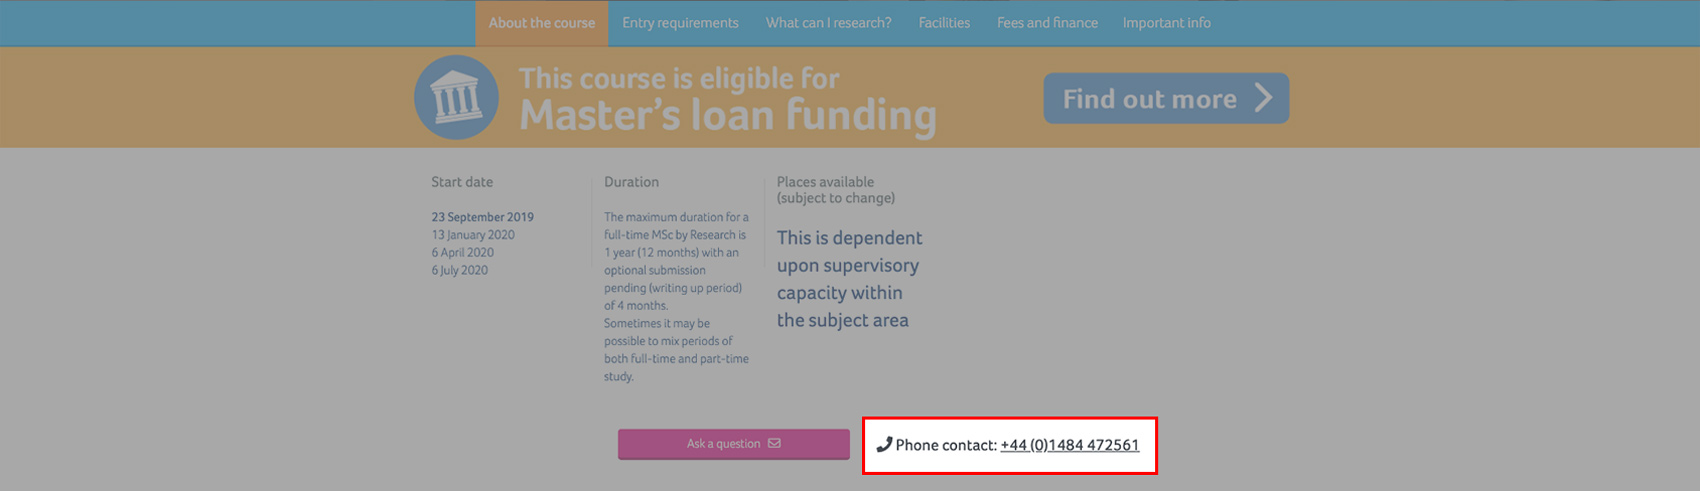 A screenshot of the coursefinder application with the application Phone contact highlighted.